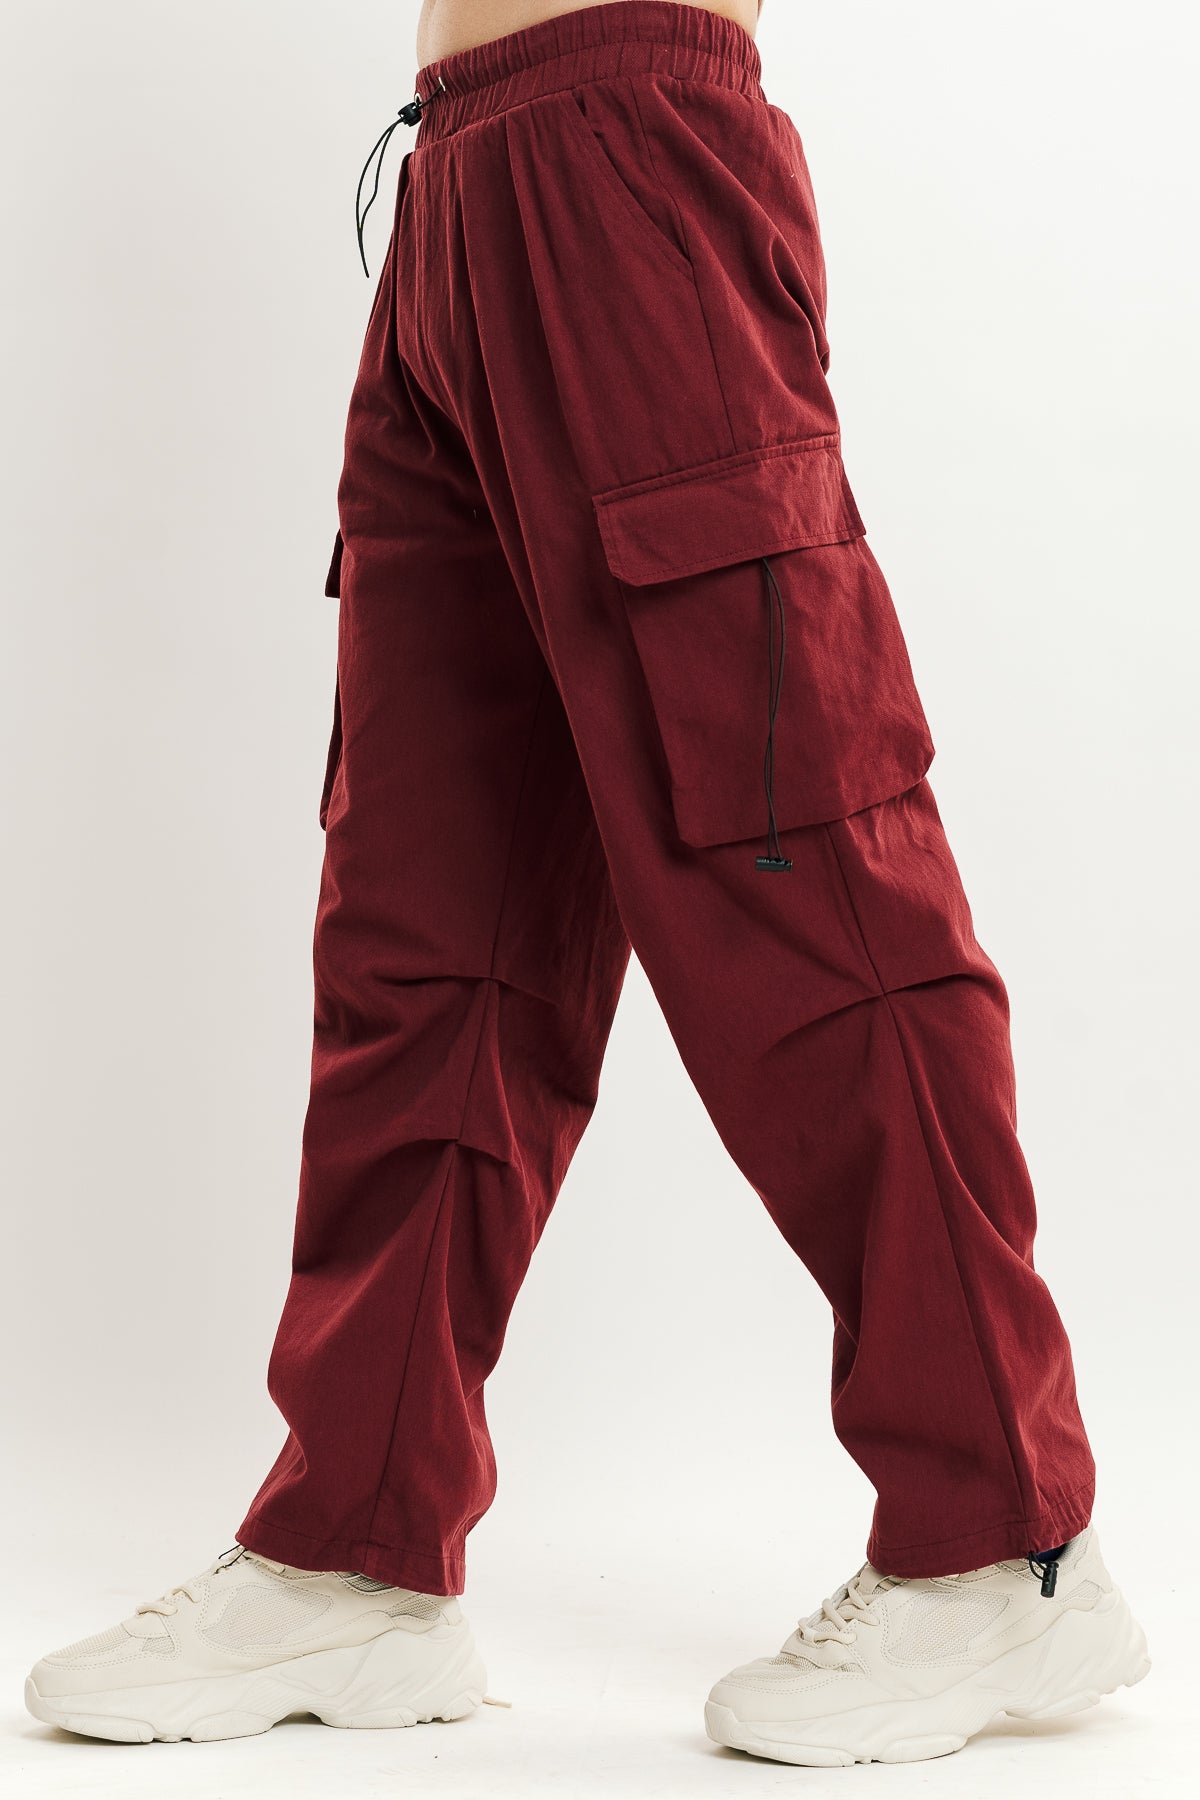 MEN'S RED STREET STYLE CARGO PANT